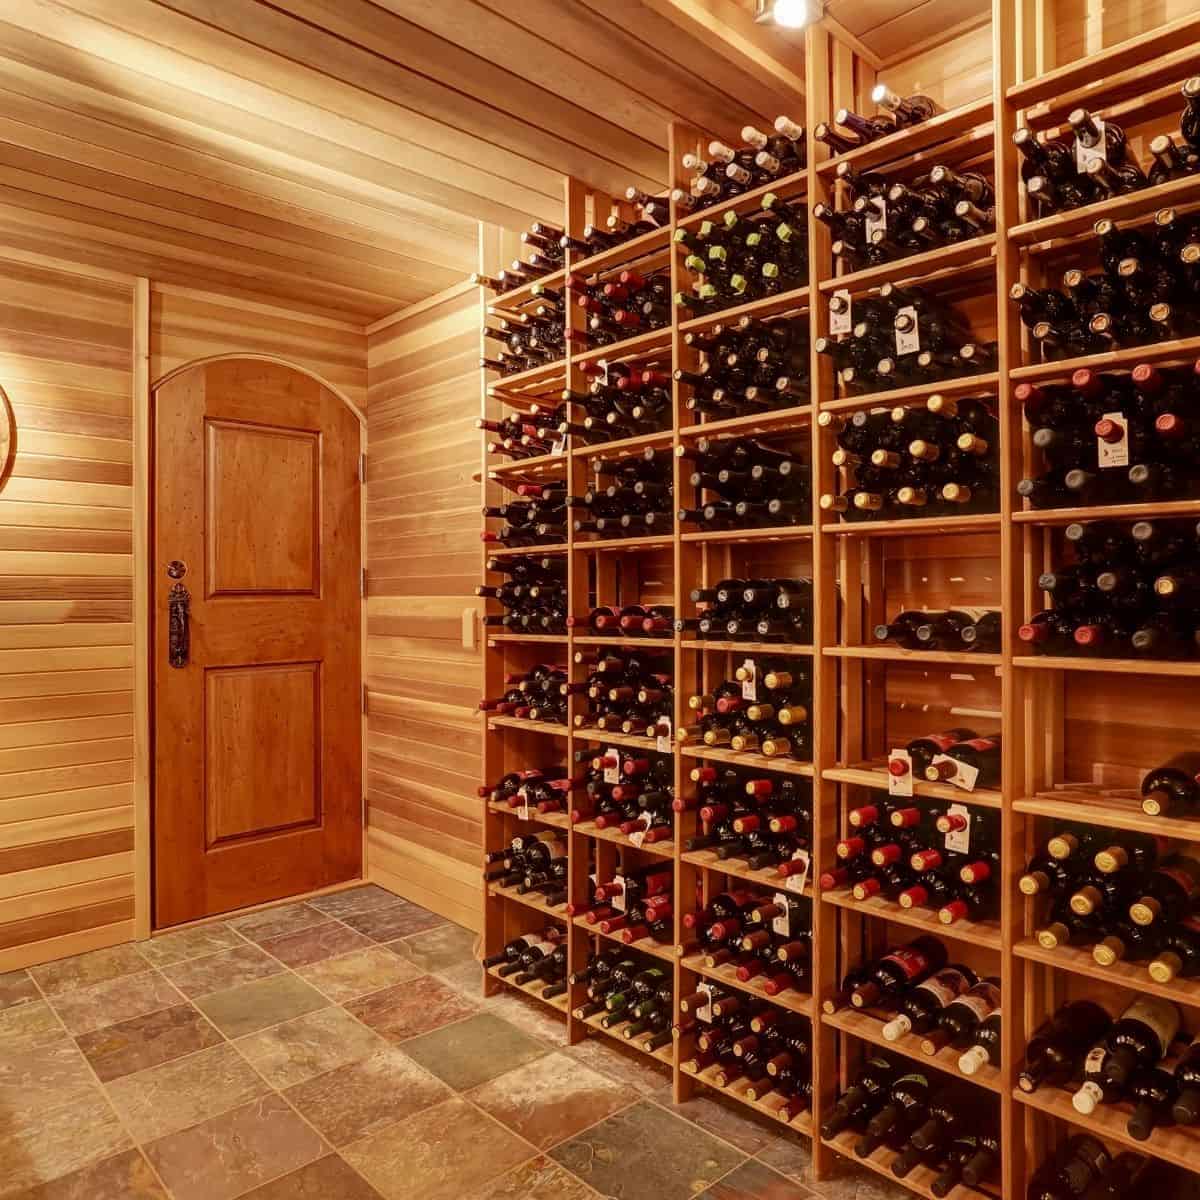 How to Build a Wine Cellar With 192 Bottle Capacity for $250